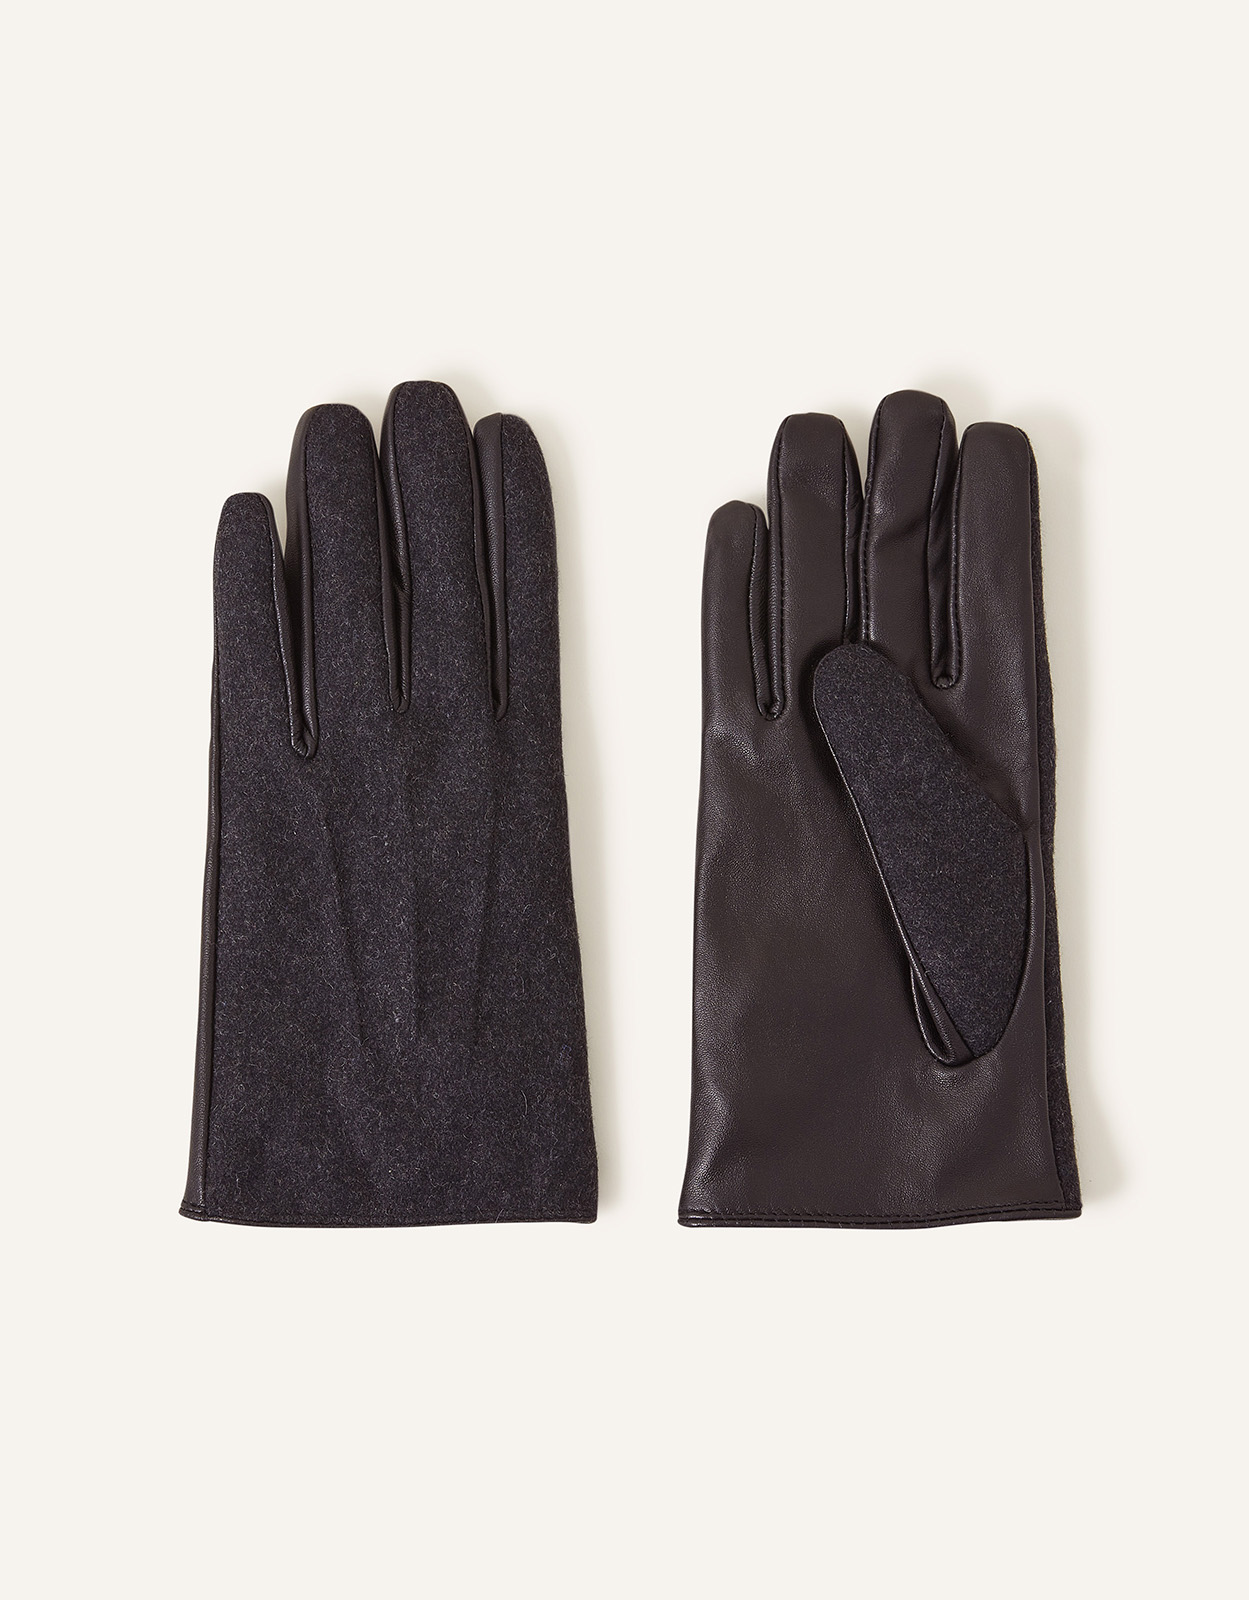 Accessorize Women's Leather Gloves in Wool Blend Grey, Size: One Size